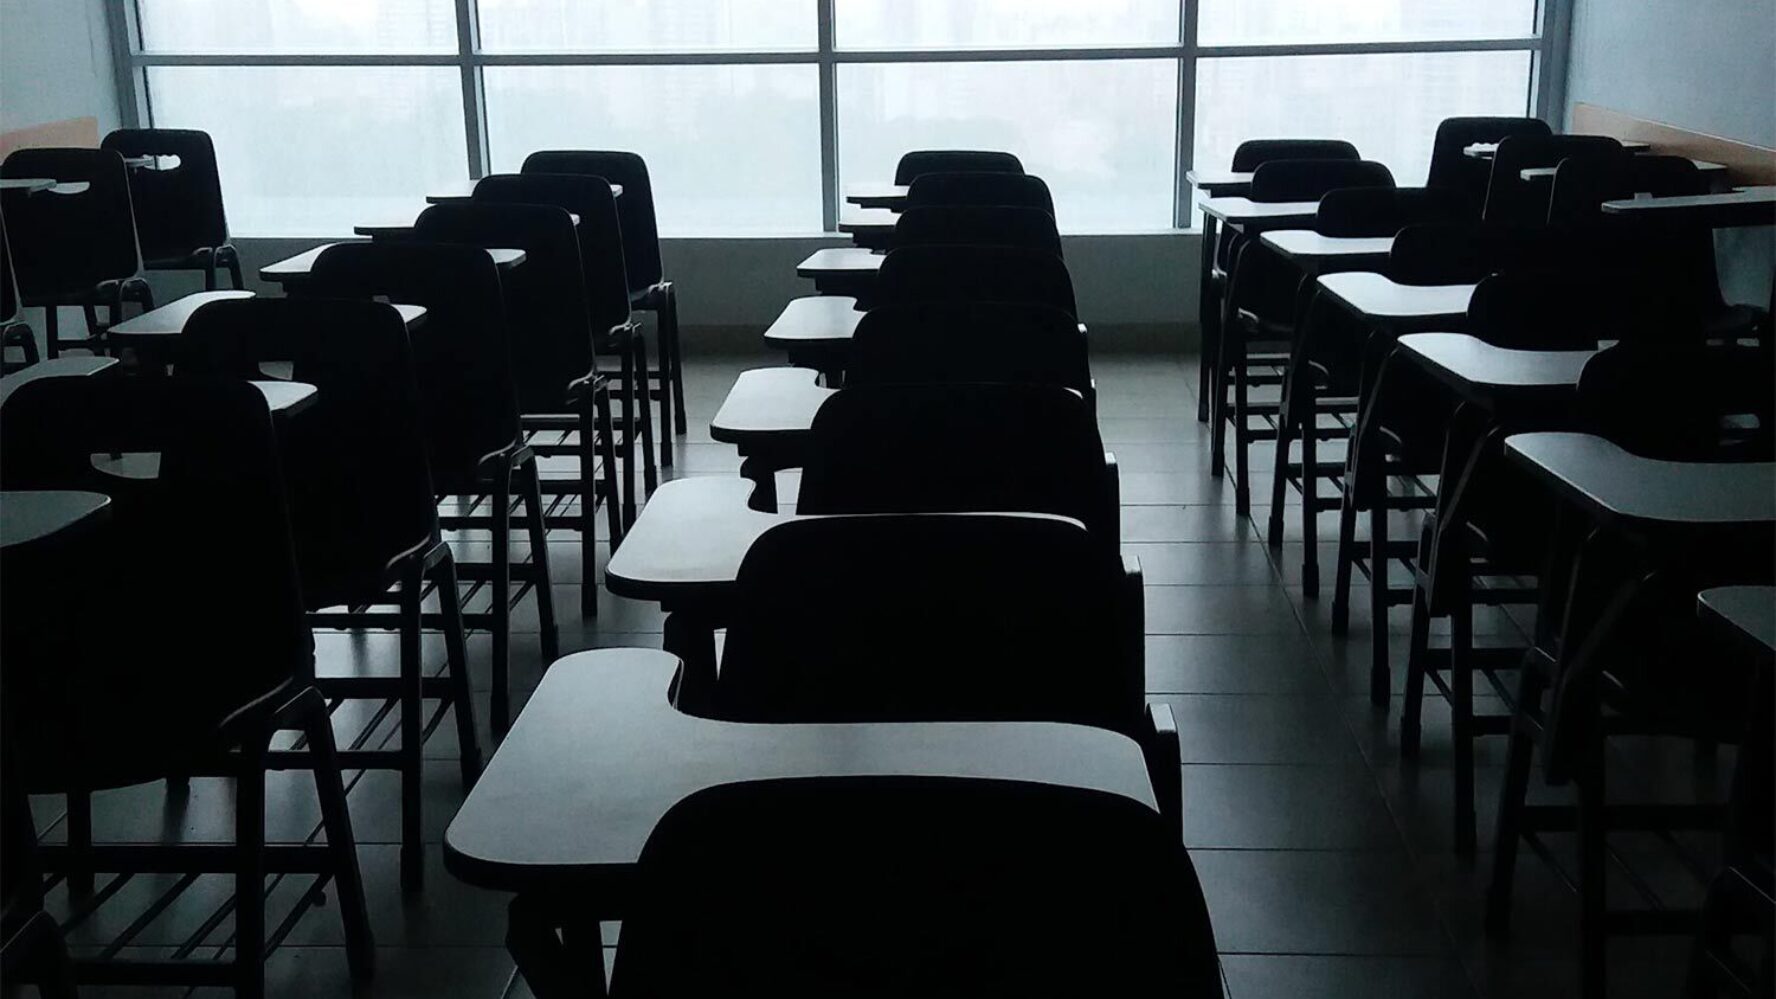 Rows of tables in an empty classroom